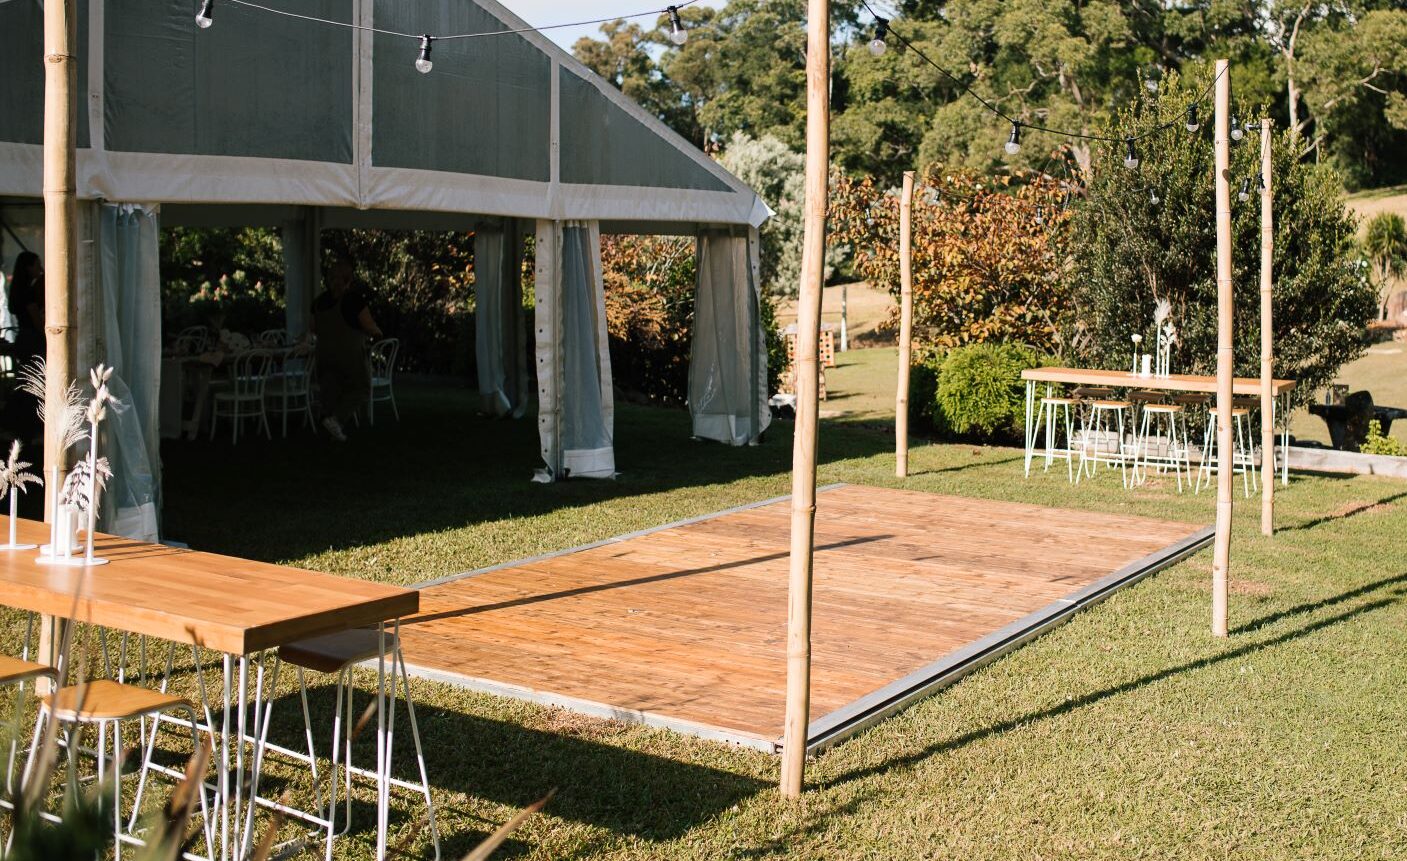 Outside Hire Dance floor for Wedding Reception with Festoon Lighting and High Bar Tables.